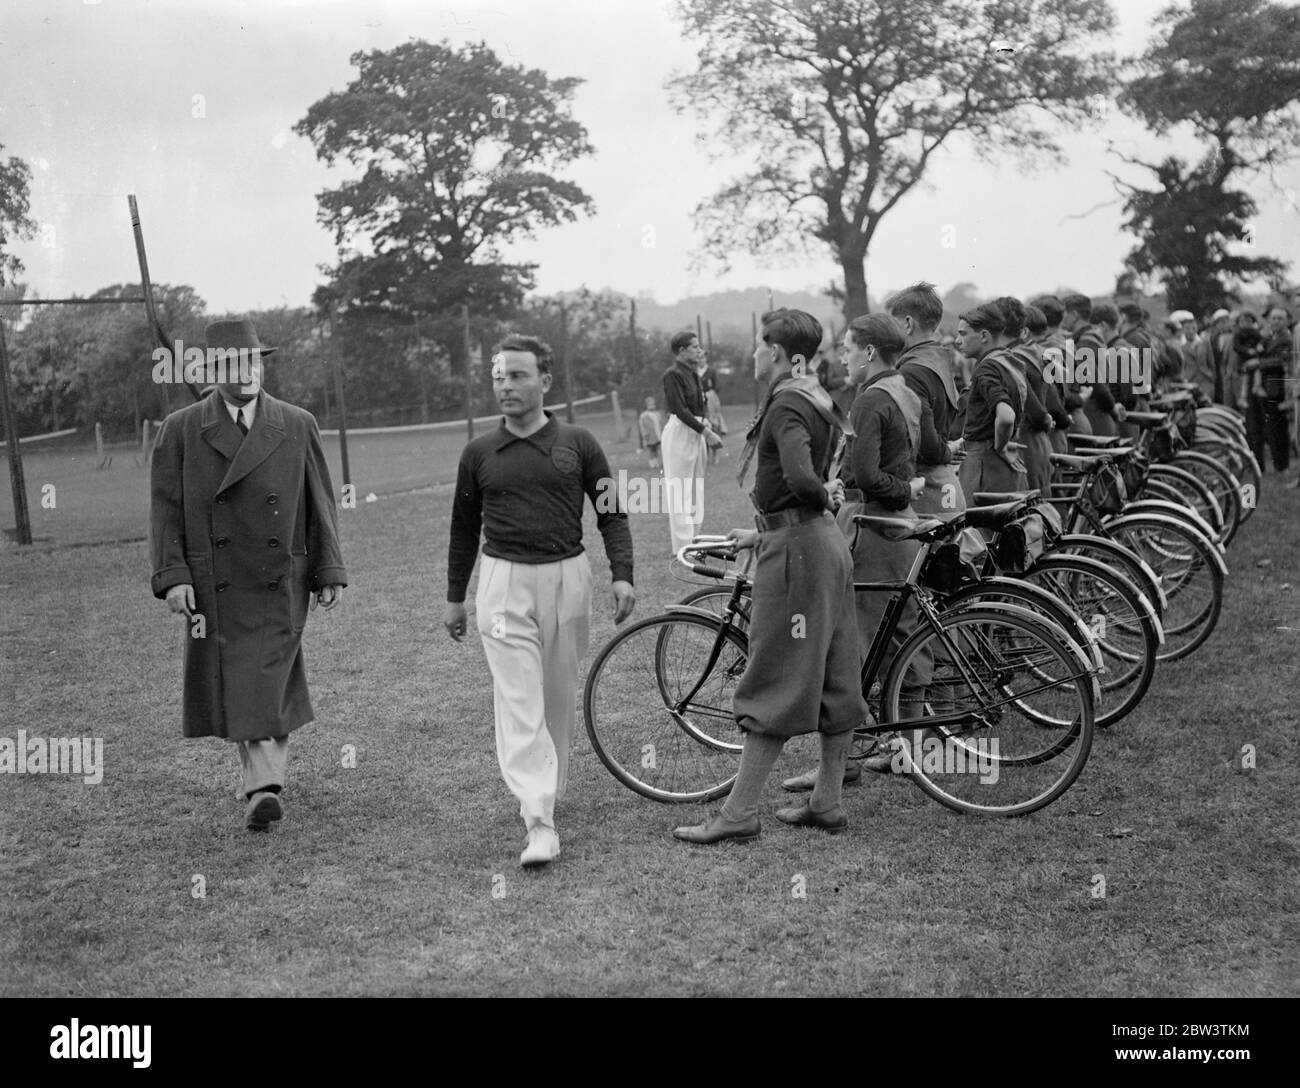 Italian Ambassador attends children ' s sports at Edgware . Signor Dino Grandi , the Italian Ambassador attended the annual sports meeting of the children of the Italian colony in London held at the BCI sports ground at Canons Park , Edgware . He was greeted with the Fascist salute when he arrived with Signor Grandi . Photo shows , Signor Grandi inspecting Italian Fascist cyclists . 24 May 1936 Stock Photo